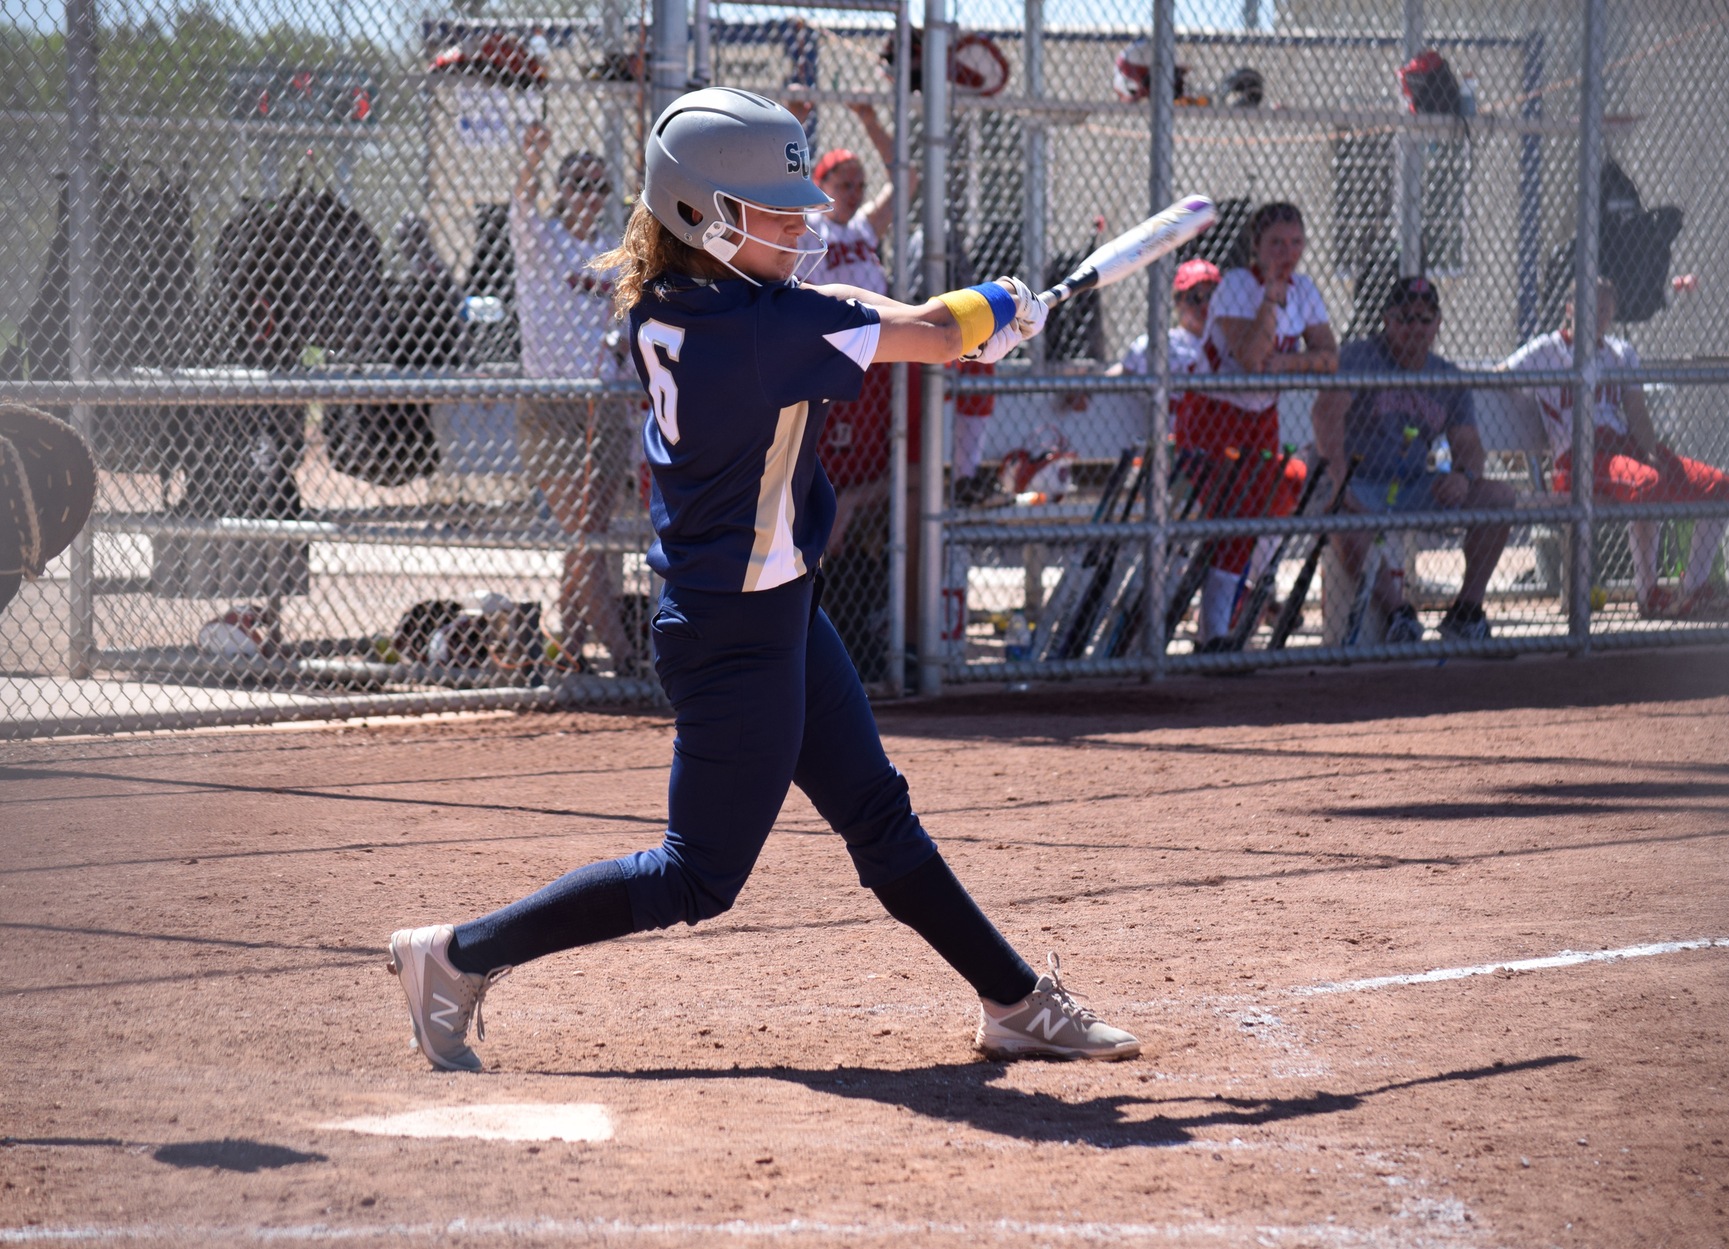 Flint’s Walk-Off Propels Softball Over Curry in Game 2